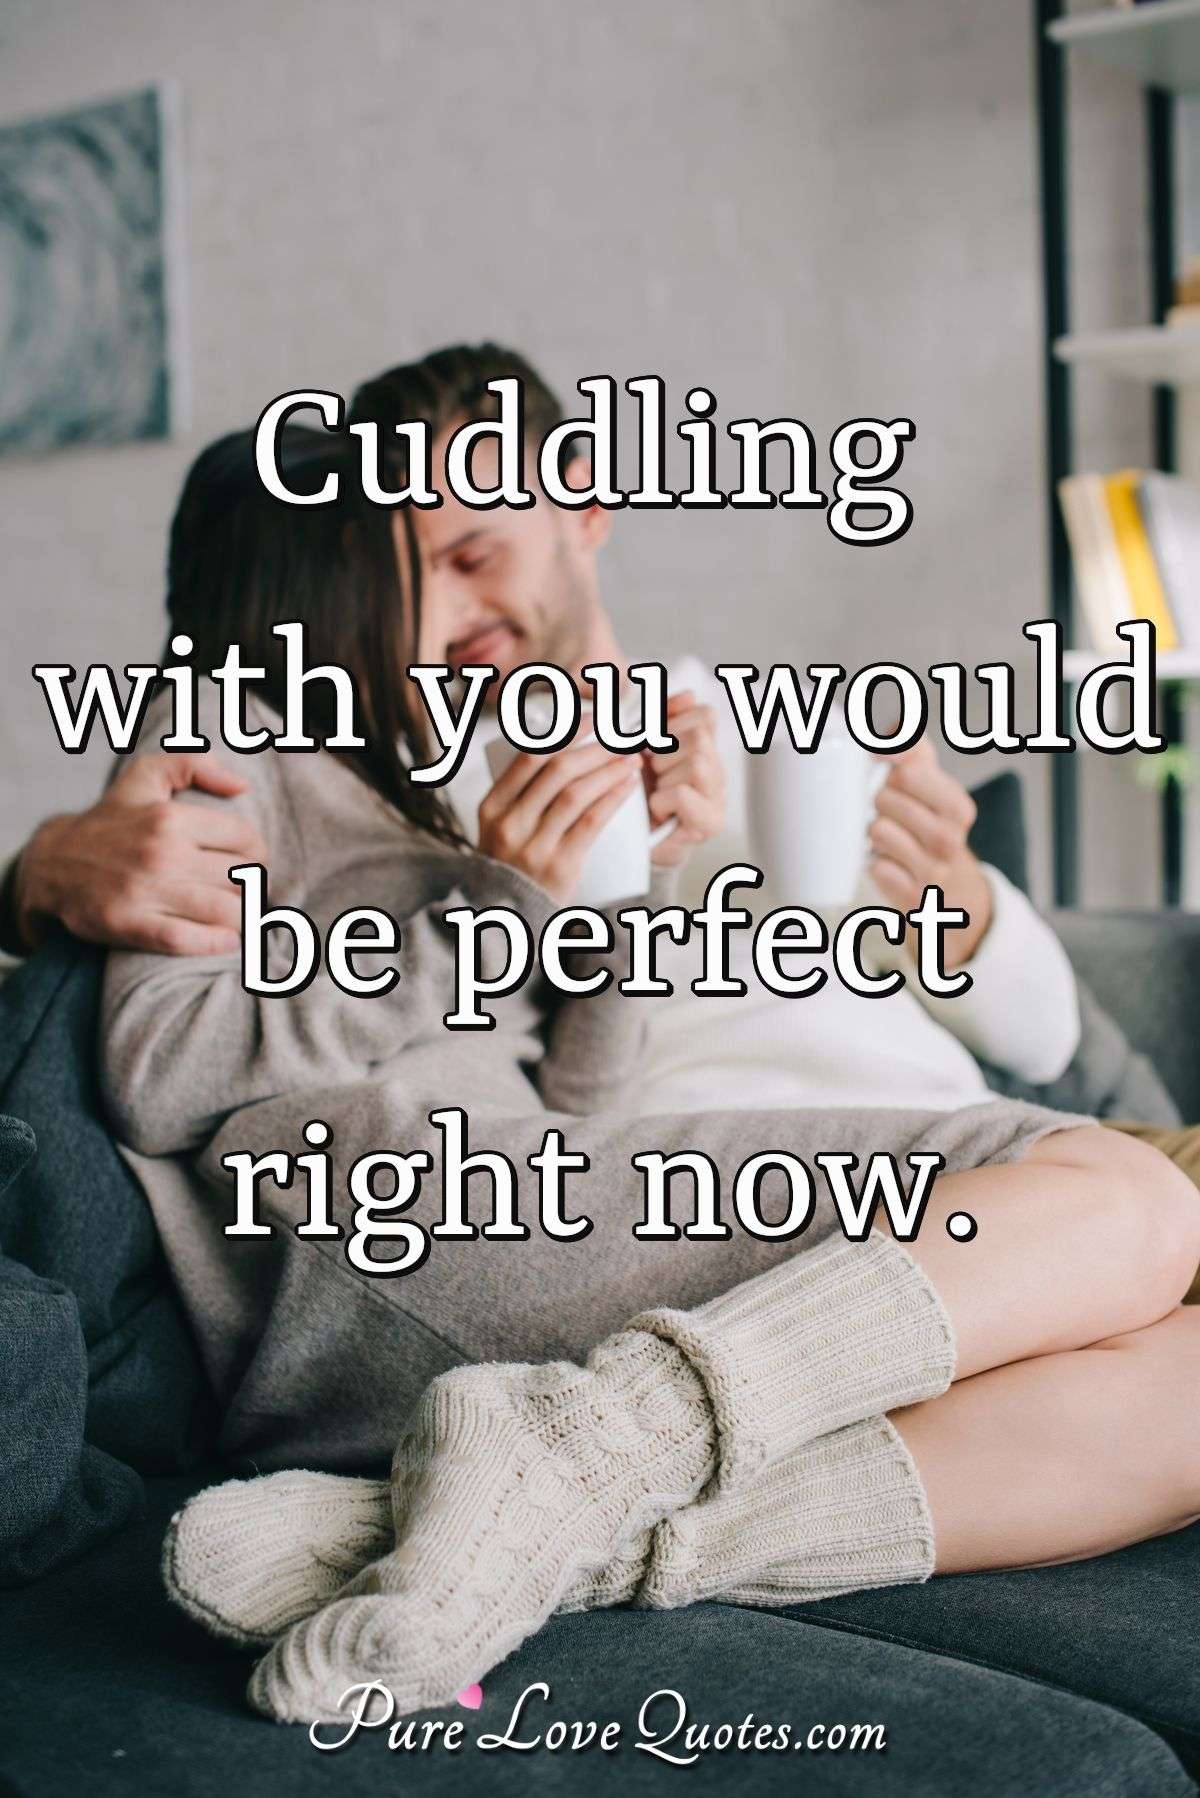 Cuddling with you would be perfect right now. PureLoveQuotes